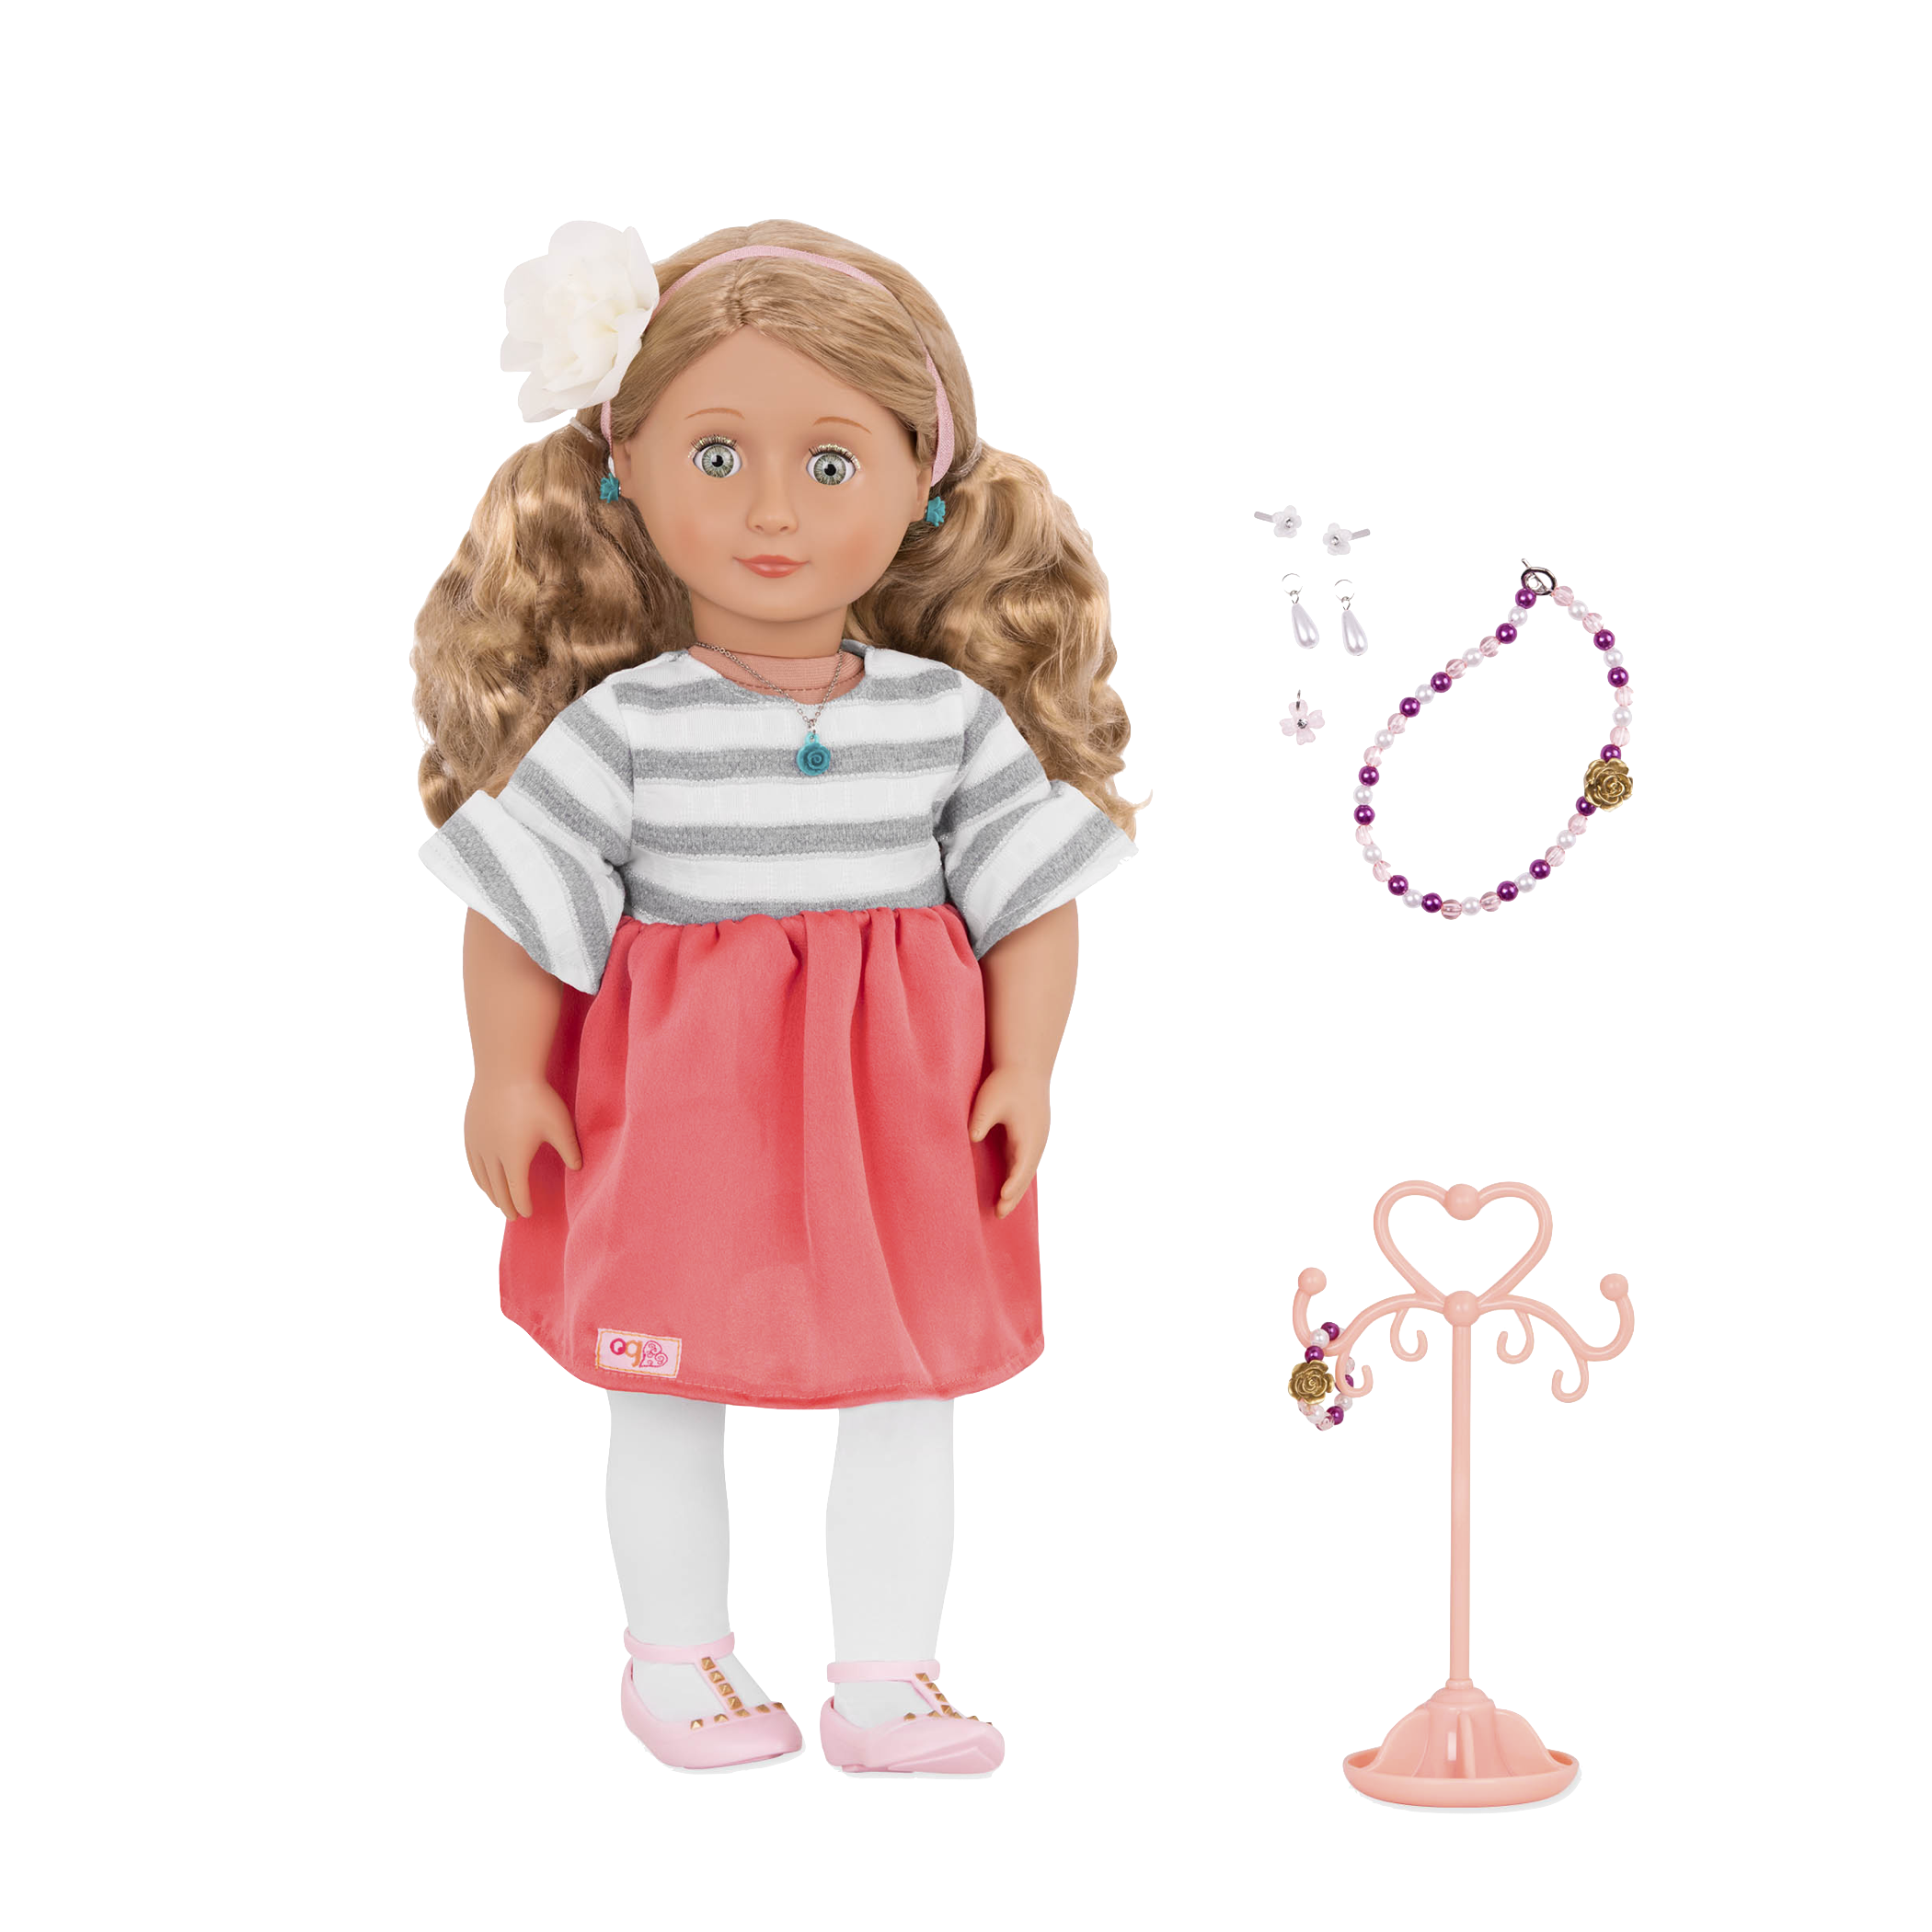 Necklace Bracelet Jewelry Accessories for 18'' American Girl Our Generation Doll 